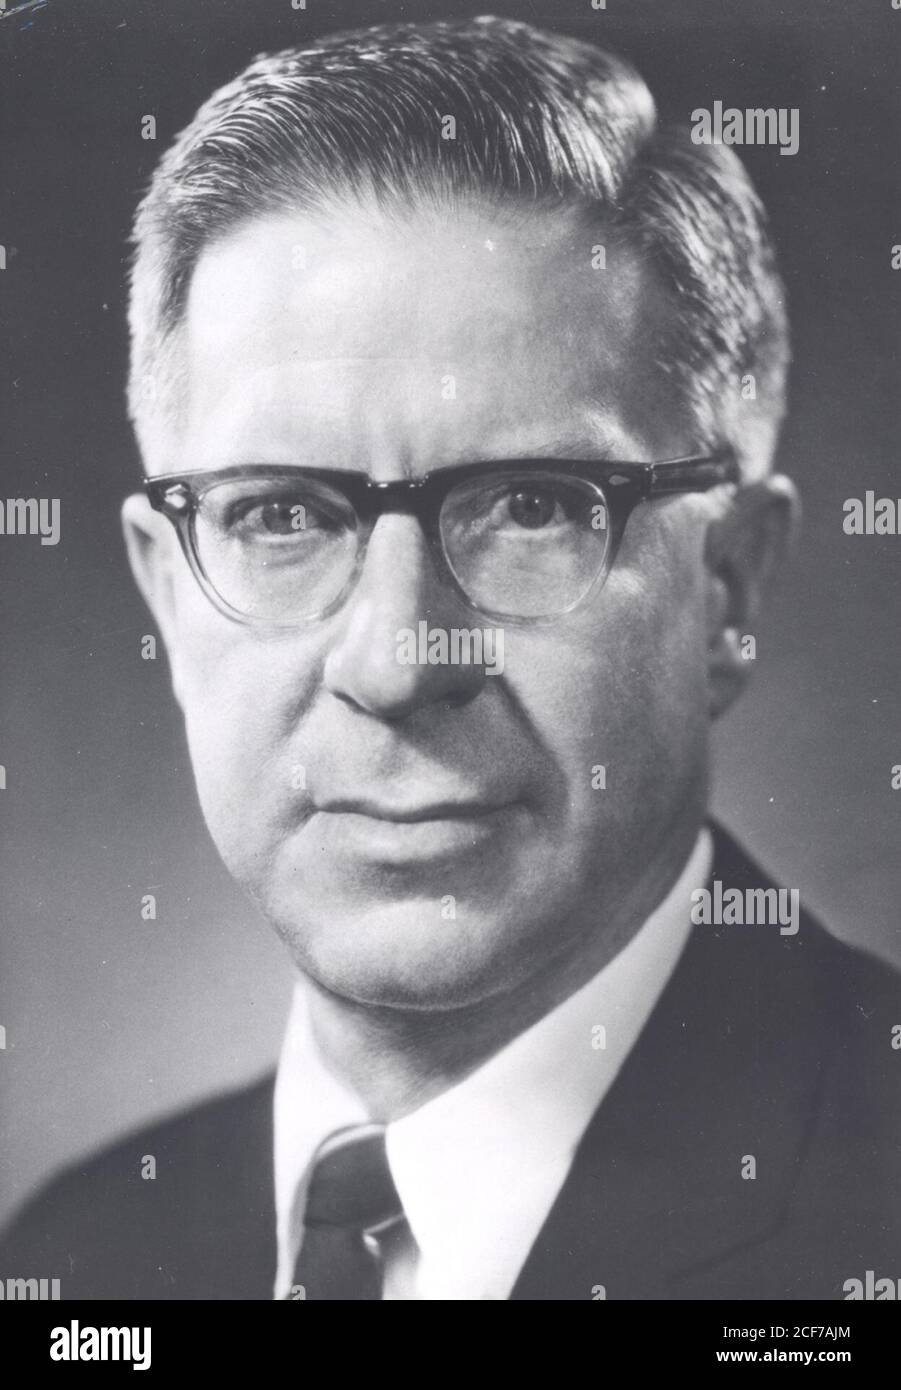 On October 1, 1966, James C. Elms was appointed Director of the NASA Electronics Resource Center in Cambridge, Massachusetts. Elms served as director until the closing of the ERC on June 30, 1970. Prior to his appointment as ERC Director, James Elms served as Deputy Director of NASA Manned Spacecraft Center in Houston, Texas and then as Deputy Associate Administrator for them Manned Spaceflight Program at NASA Headquarters in Washington, DC. The ERC opened in September 1964, taking over the administration of contracts, grants, and other NASA business in New England from the antecedent North Ea Stock Photo